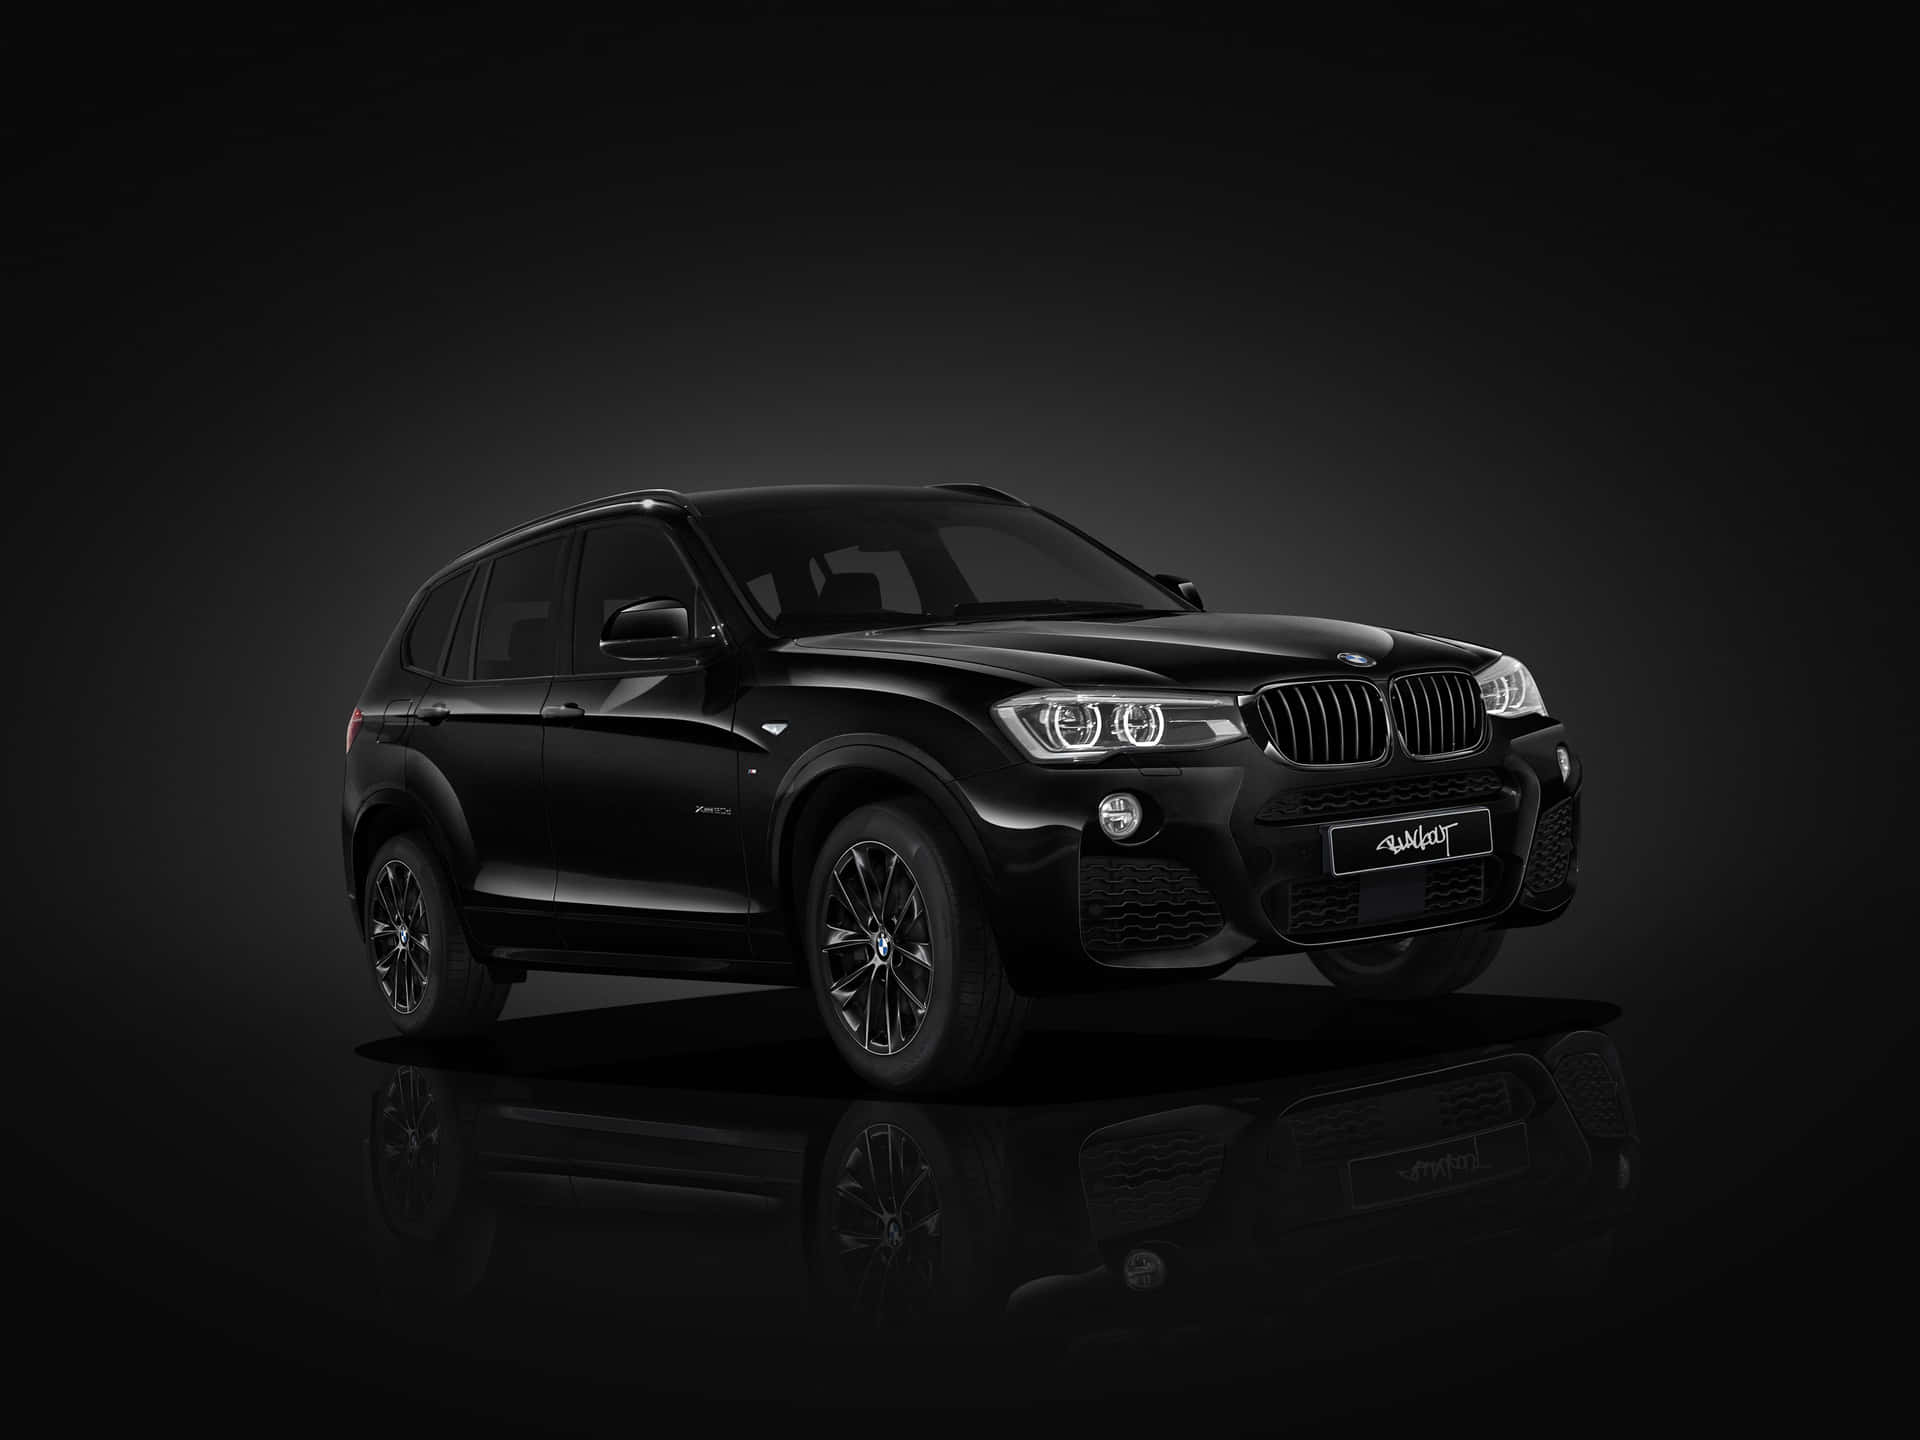 Sporty and Sophisticated: The BMW X3 Wallpaper